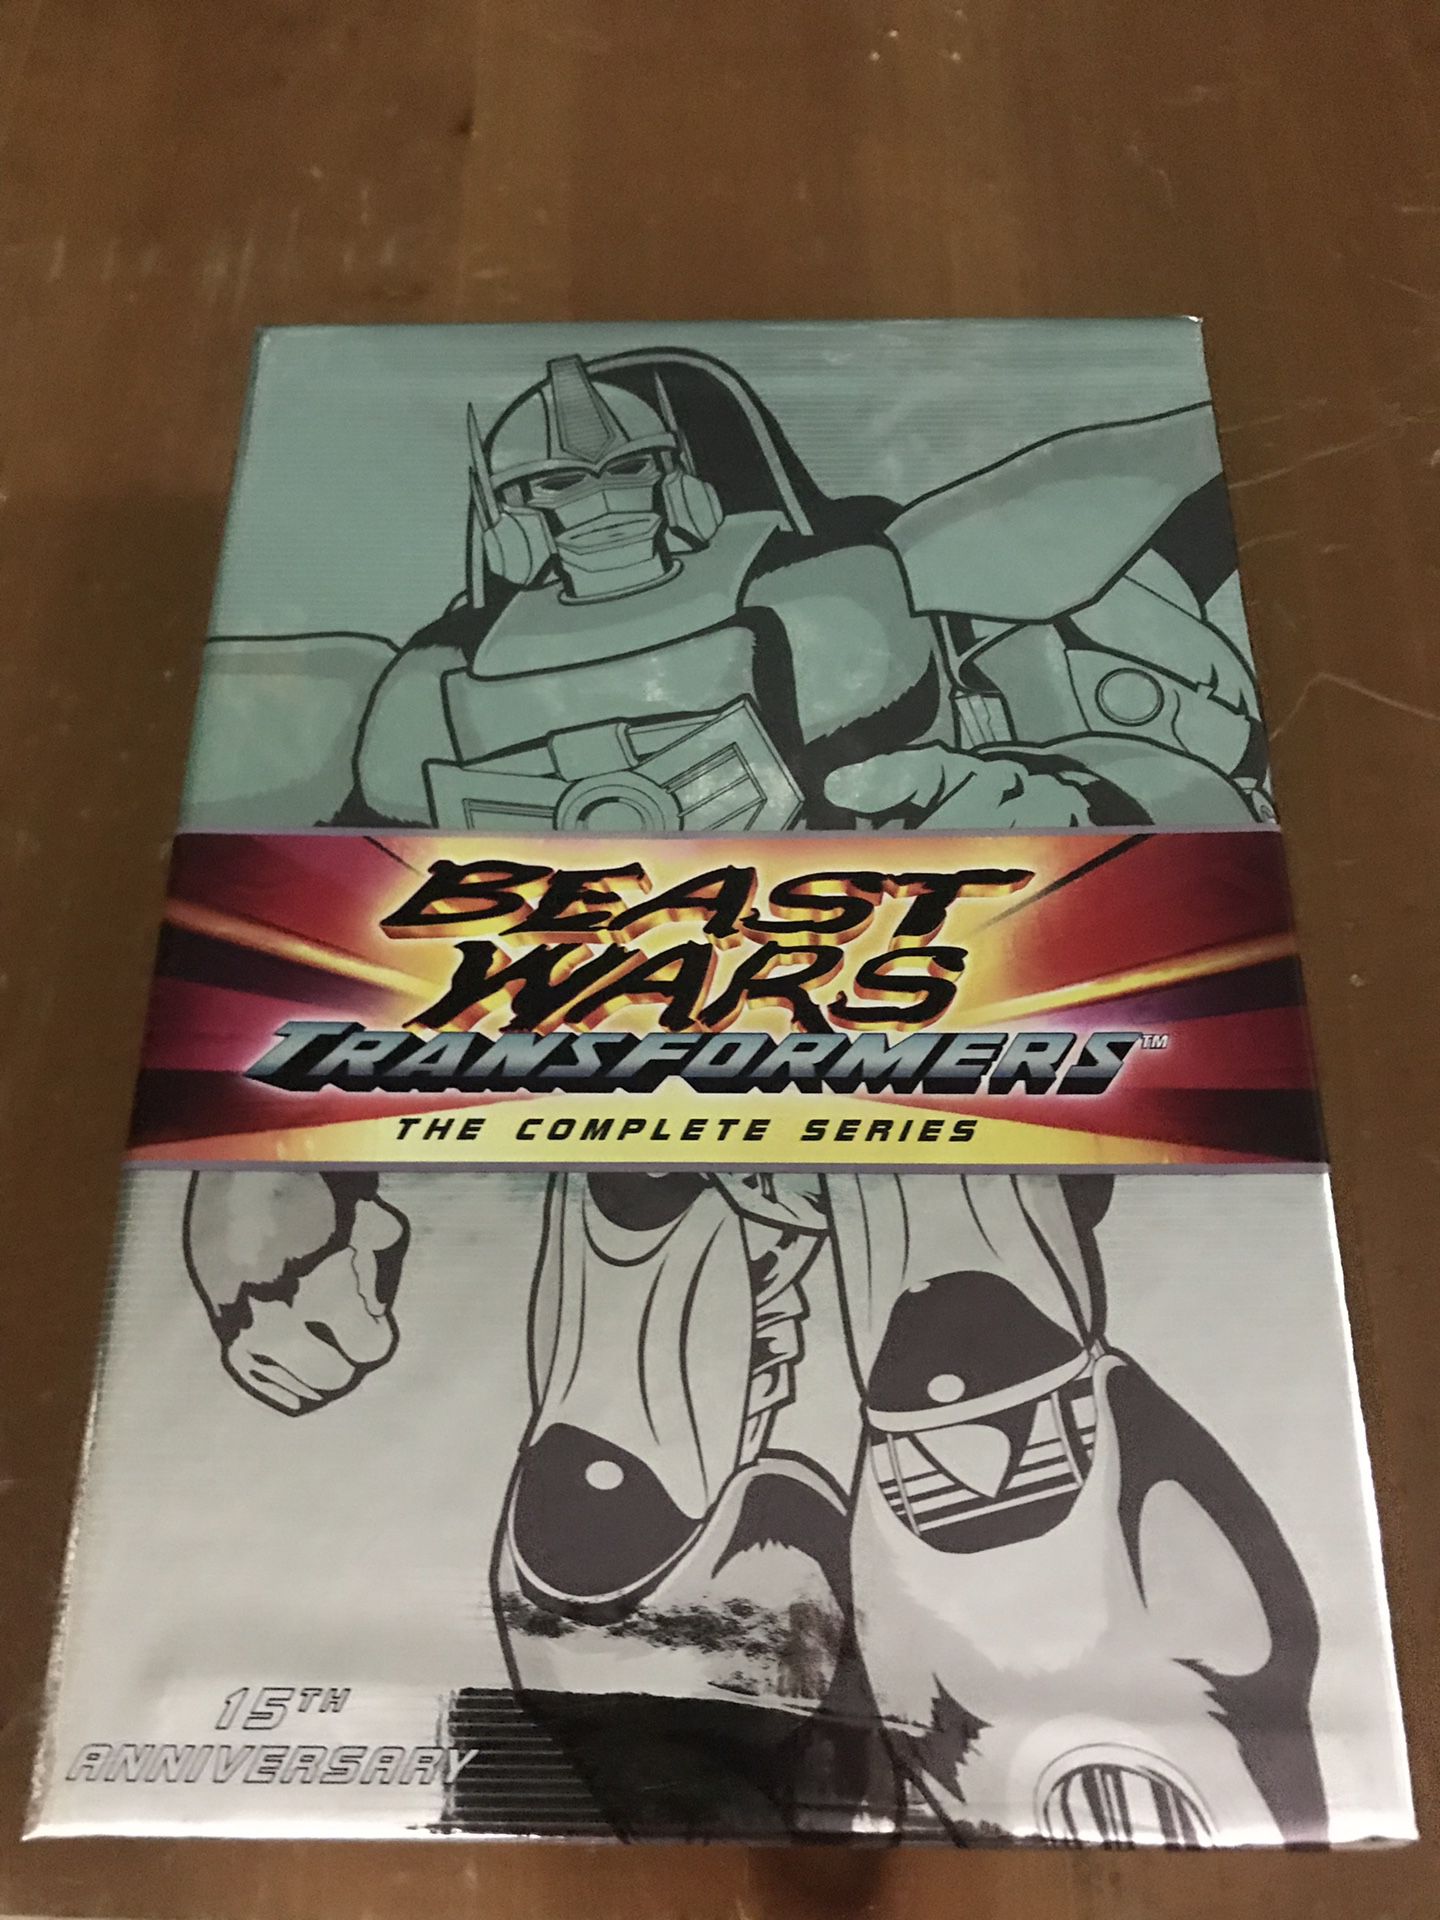 RARE Transformers: Beast Wars The Complete Series 15th Anniversary Set